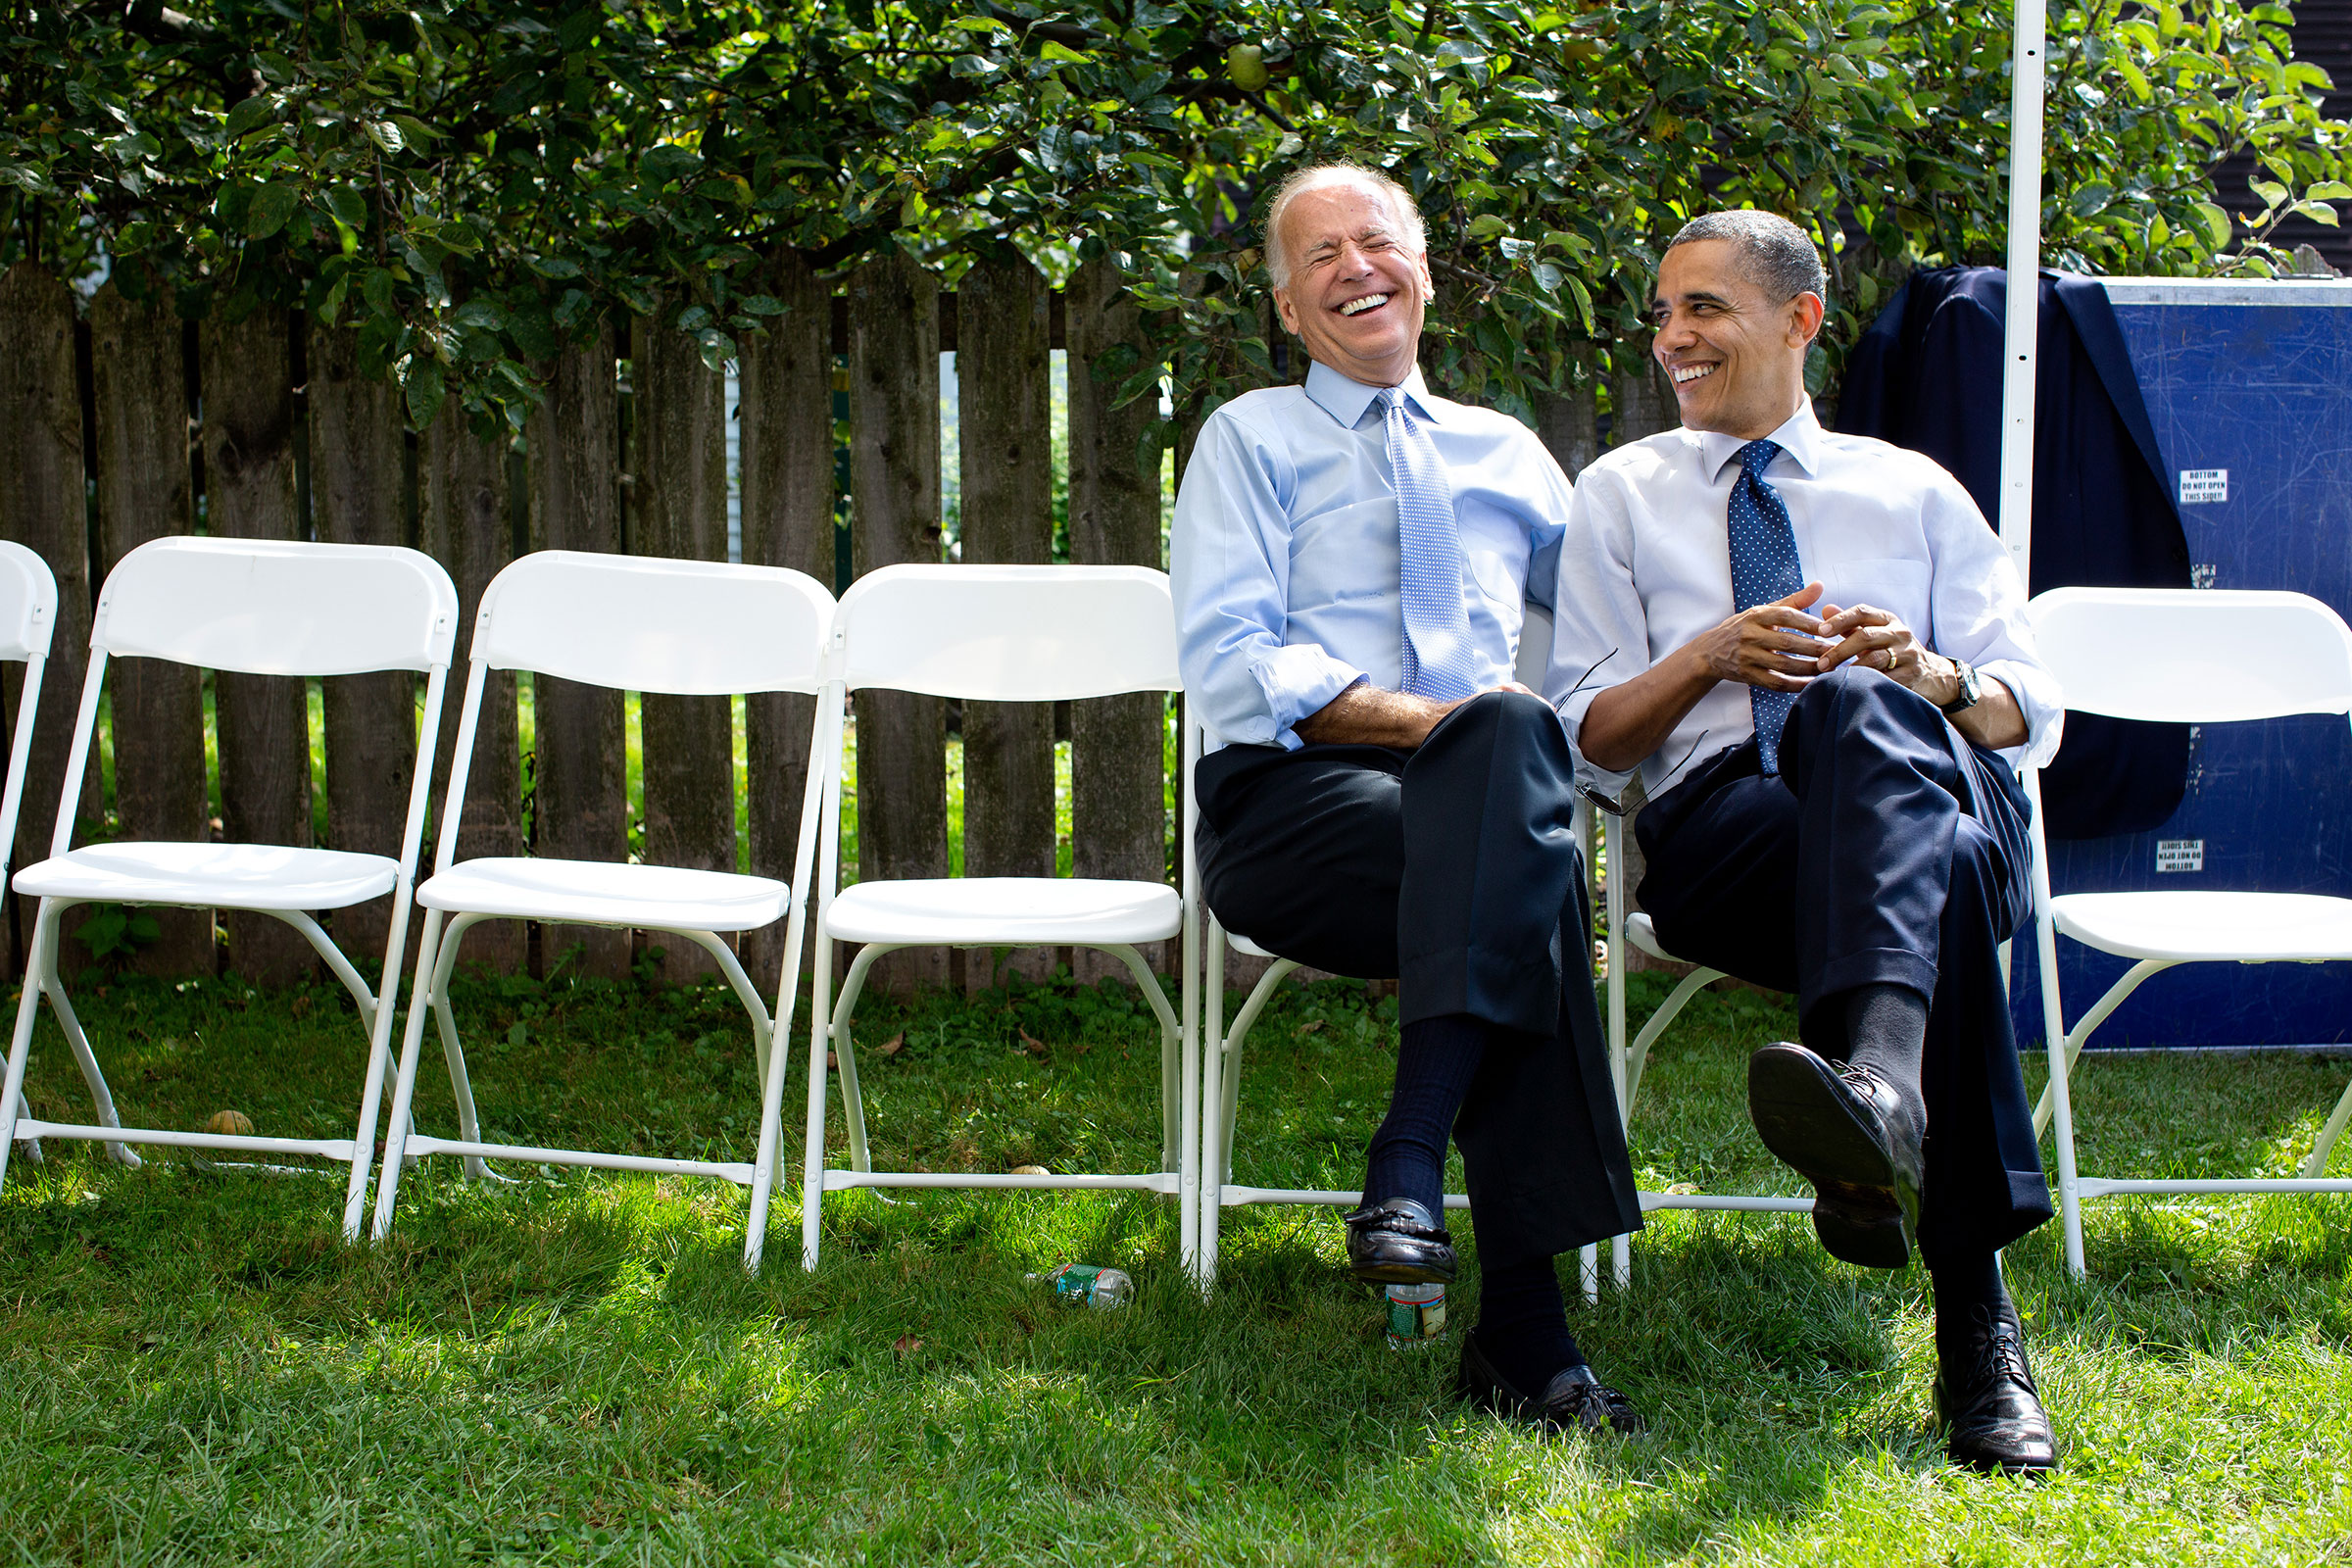 President Barack Obama and Vice President Joe Biden talk backstage during a grassroots campaign event at Strawbery Banke Museum in Portsmouth, N.H., on Sept. 7, 2012.